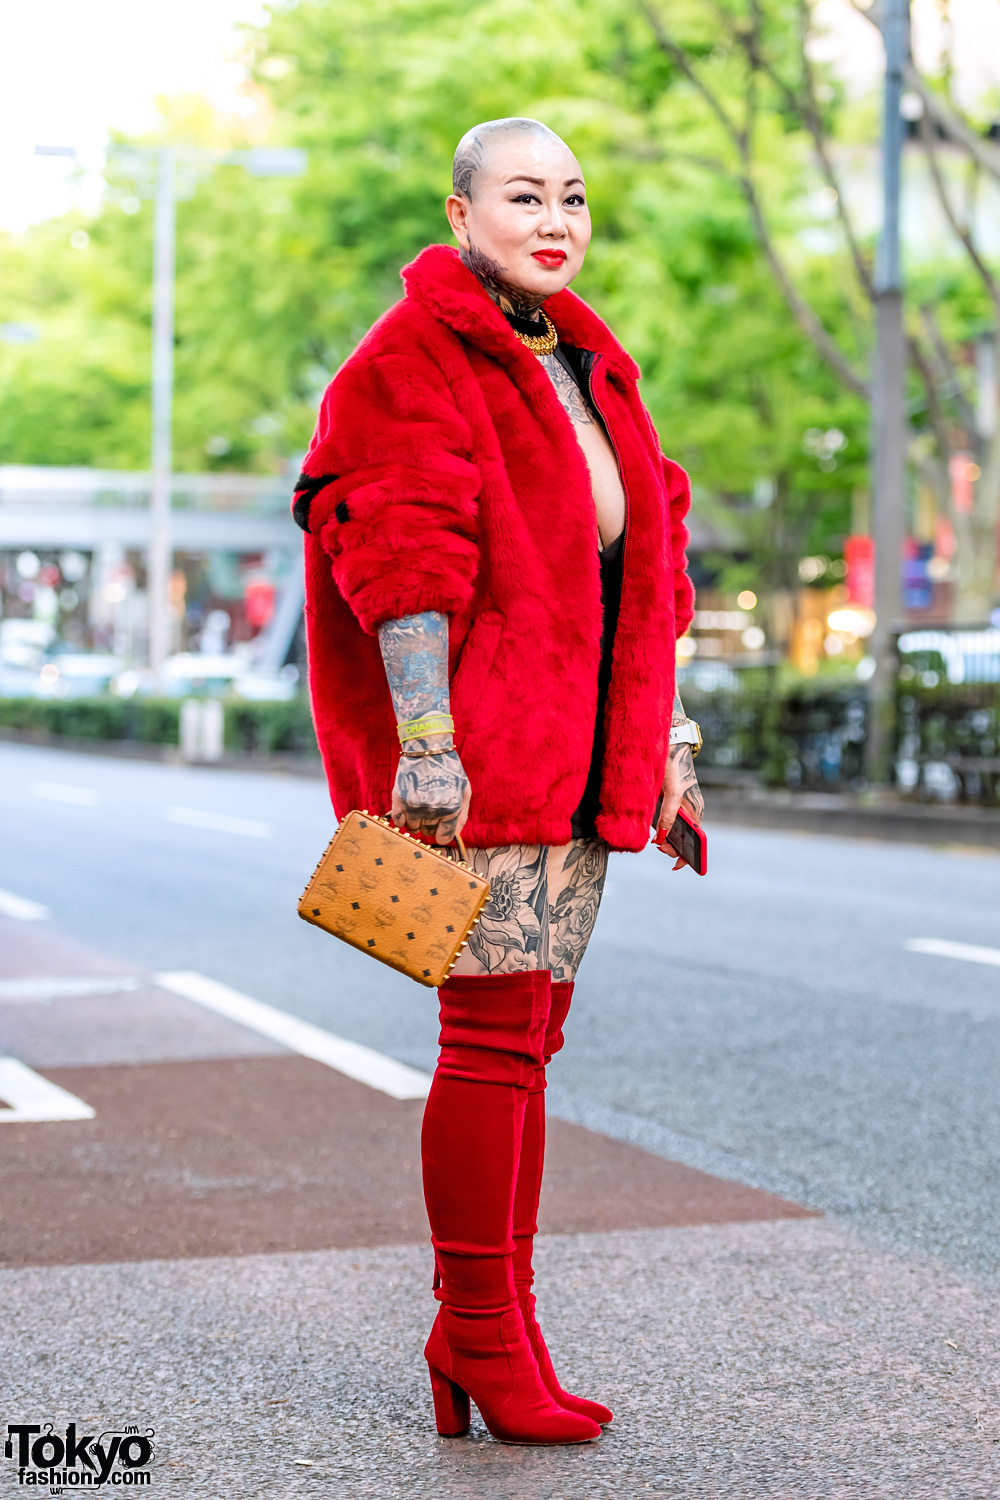 Fashion Boutique Owner in Harajuku w/ Supreme, MCM, G-Shock, Chanel & Versace